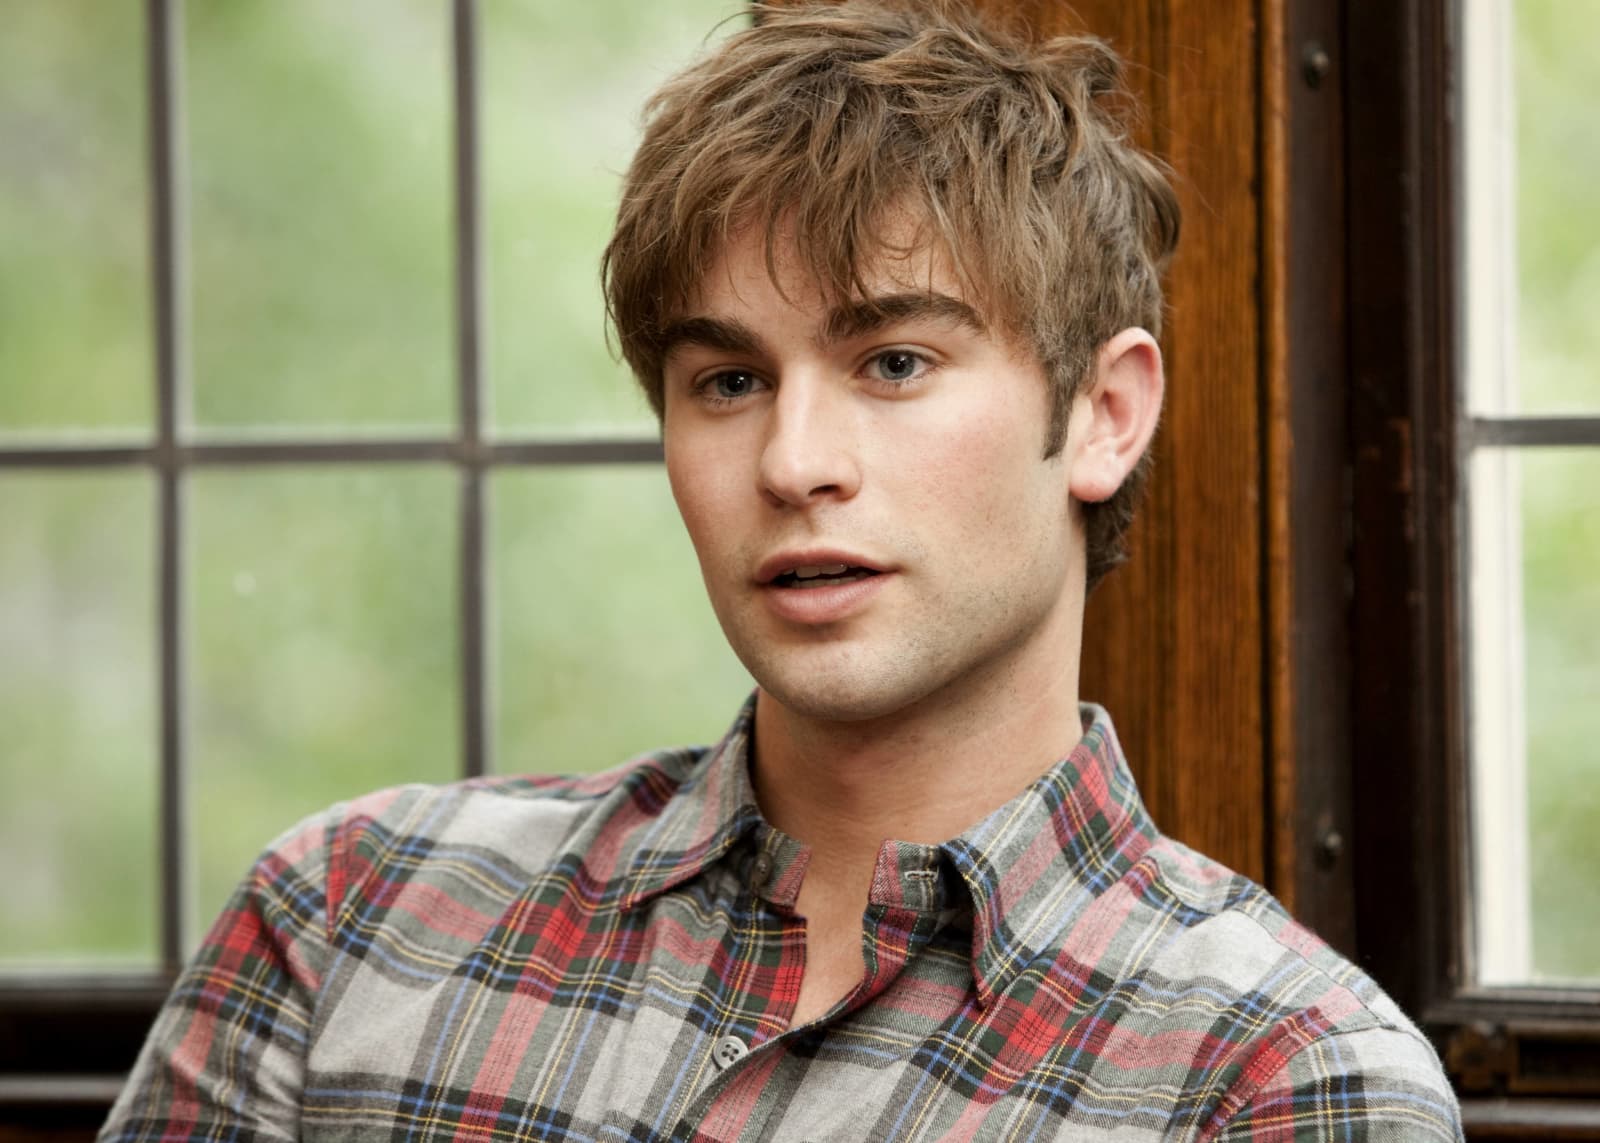 Gossip Girl': This Is "Nate Archibald" Today